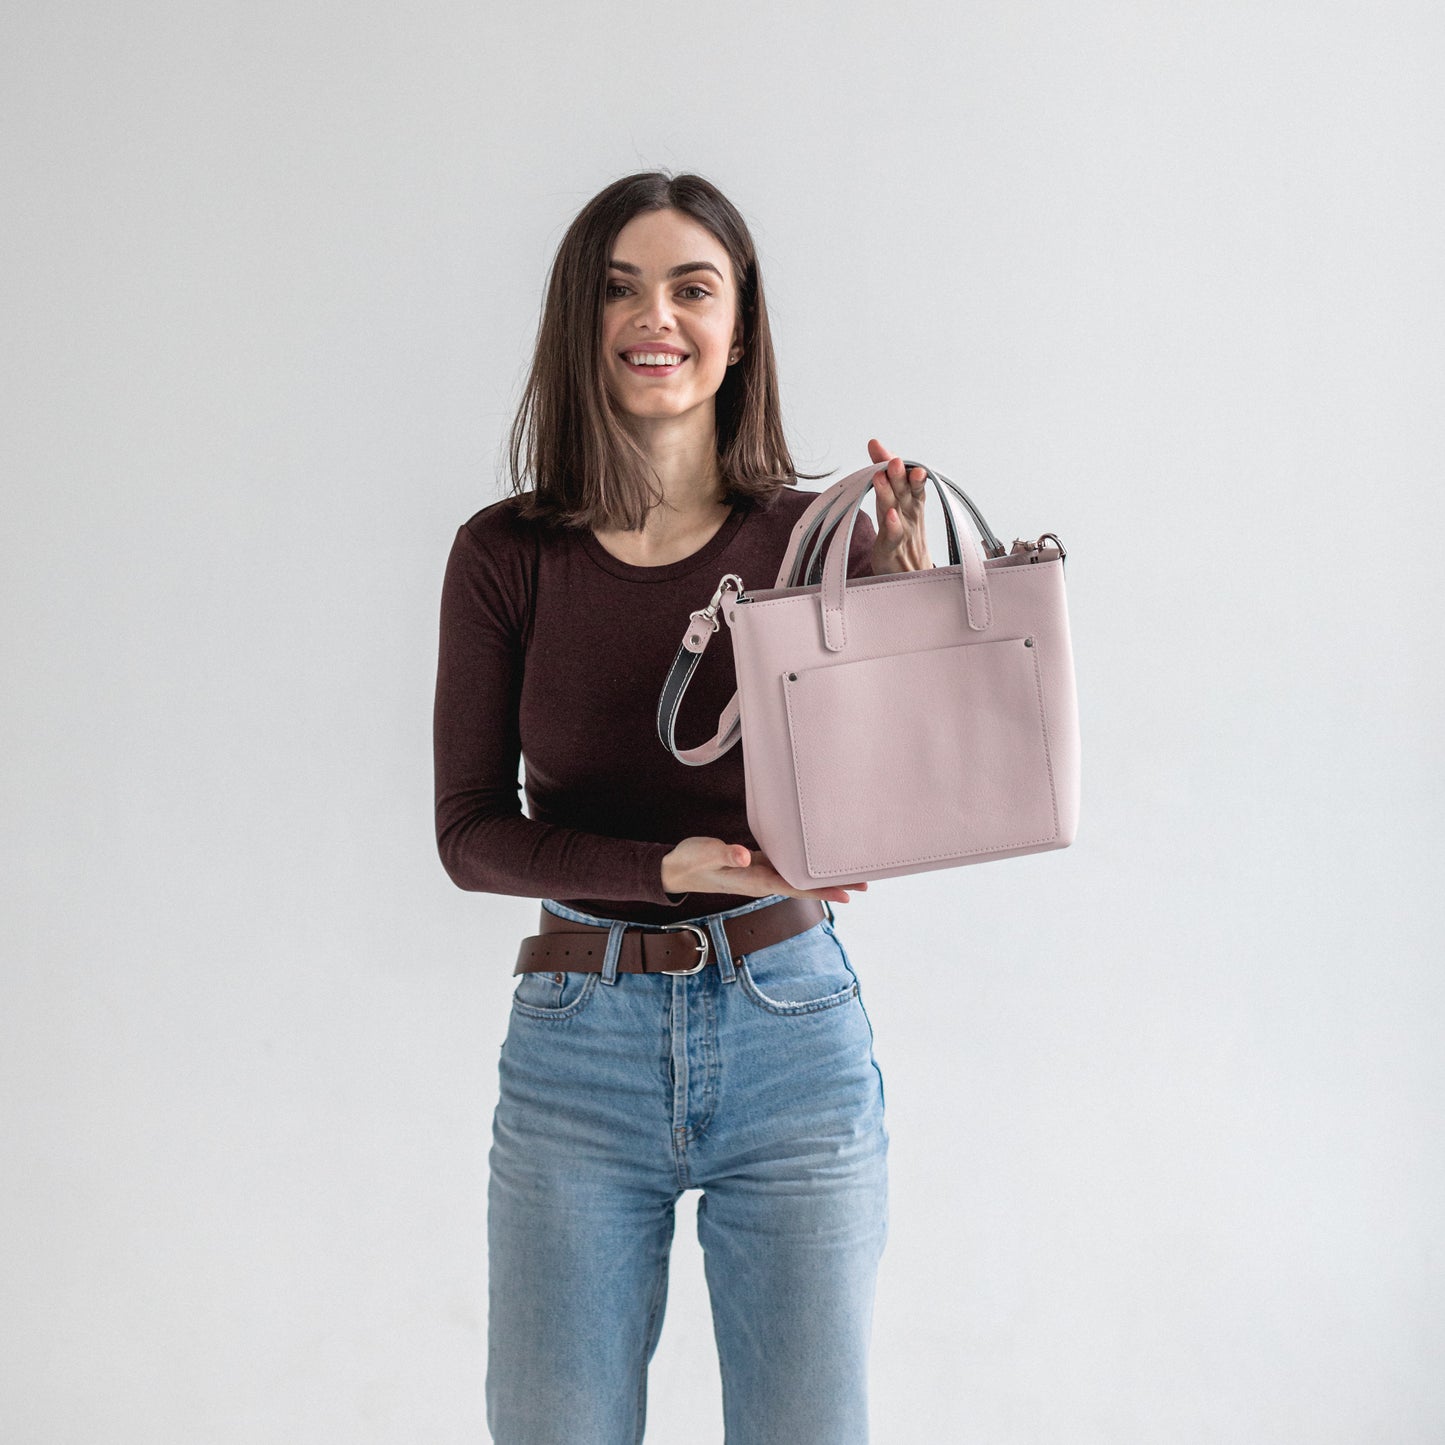 Handmade leather mini tote bag for everyday use 